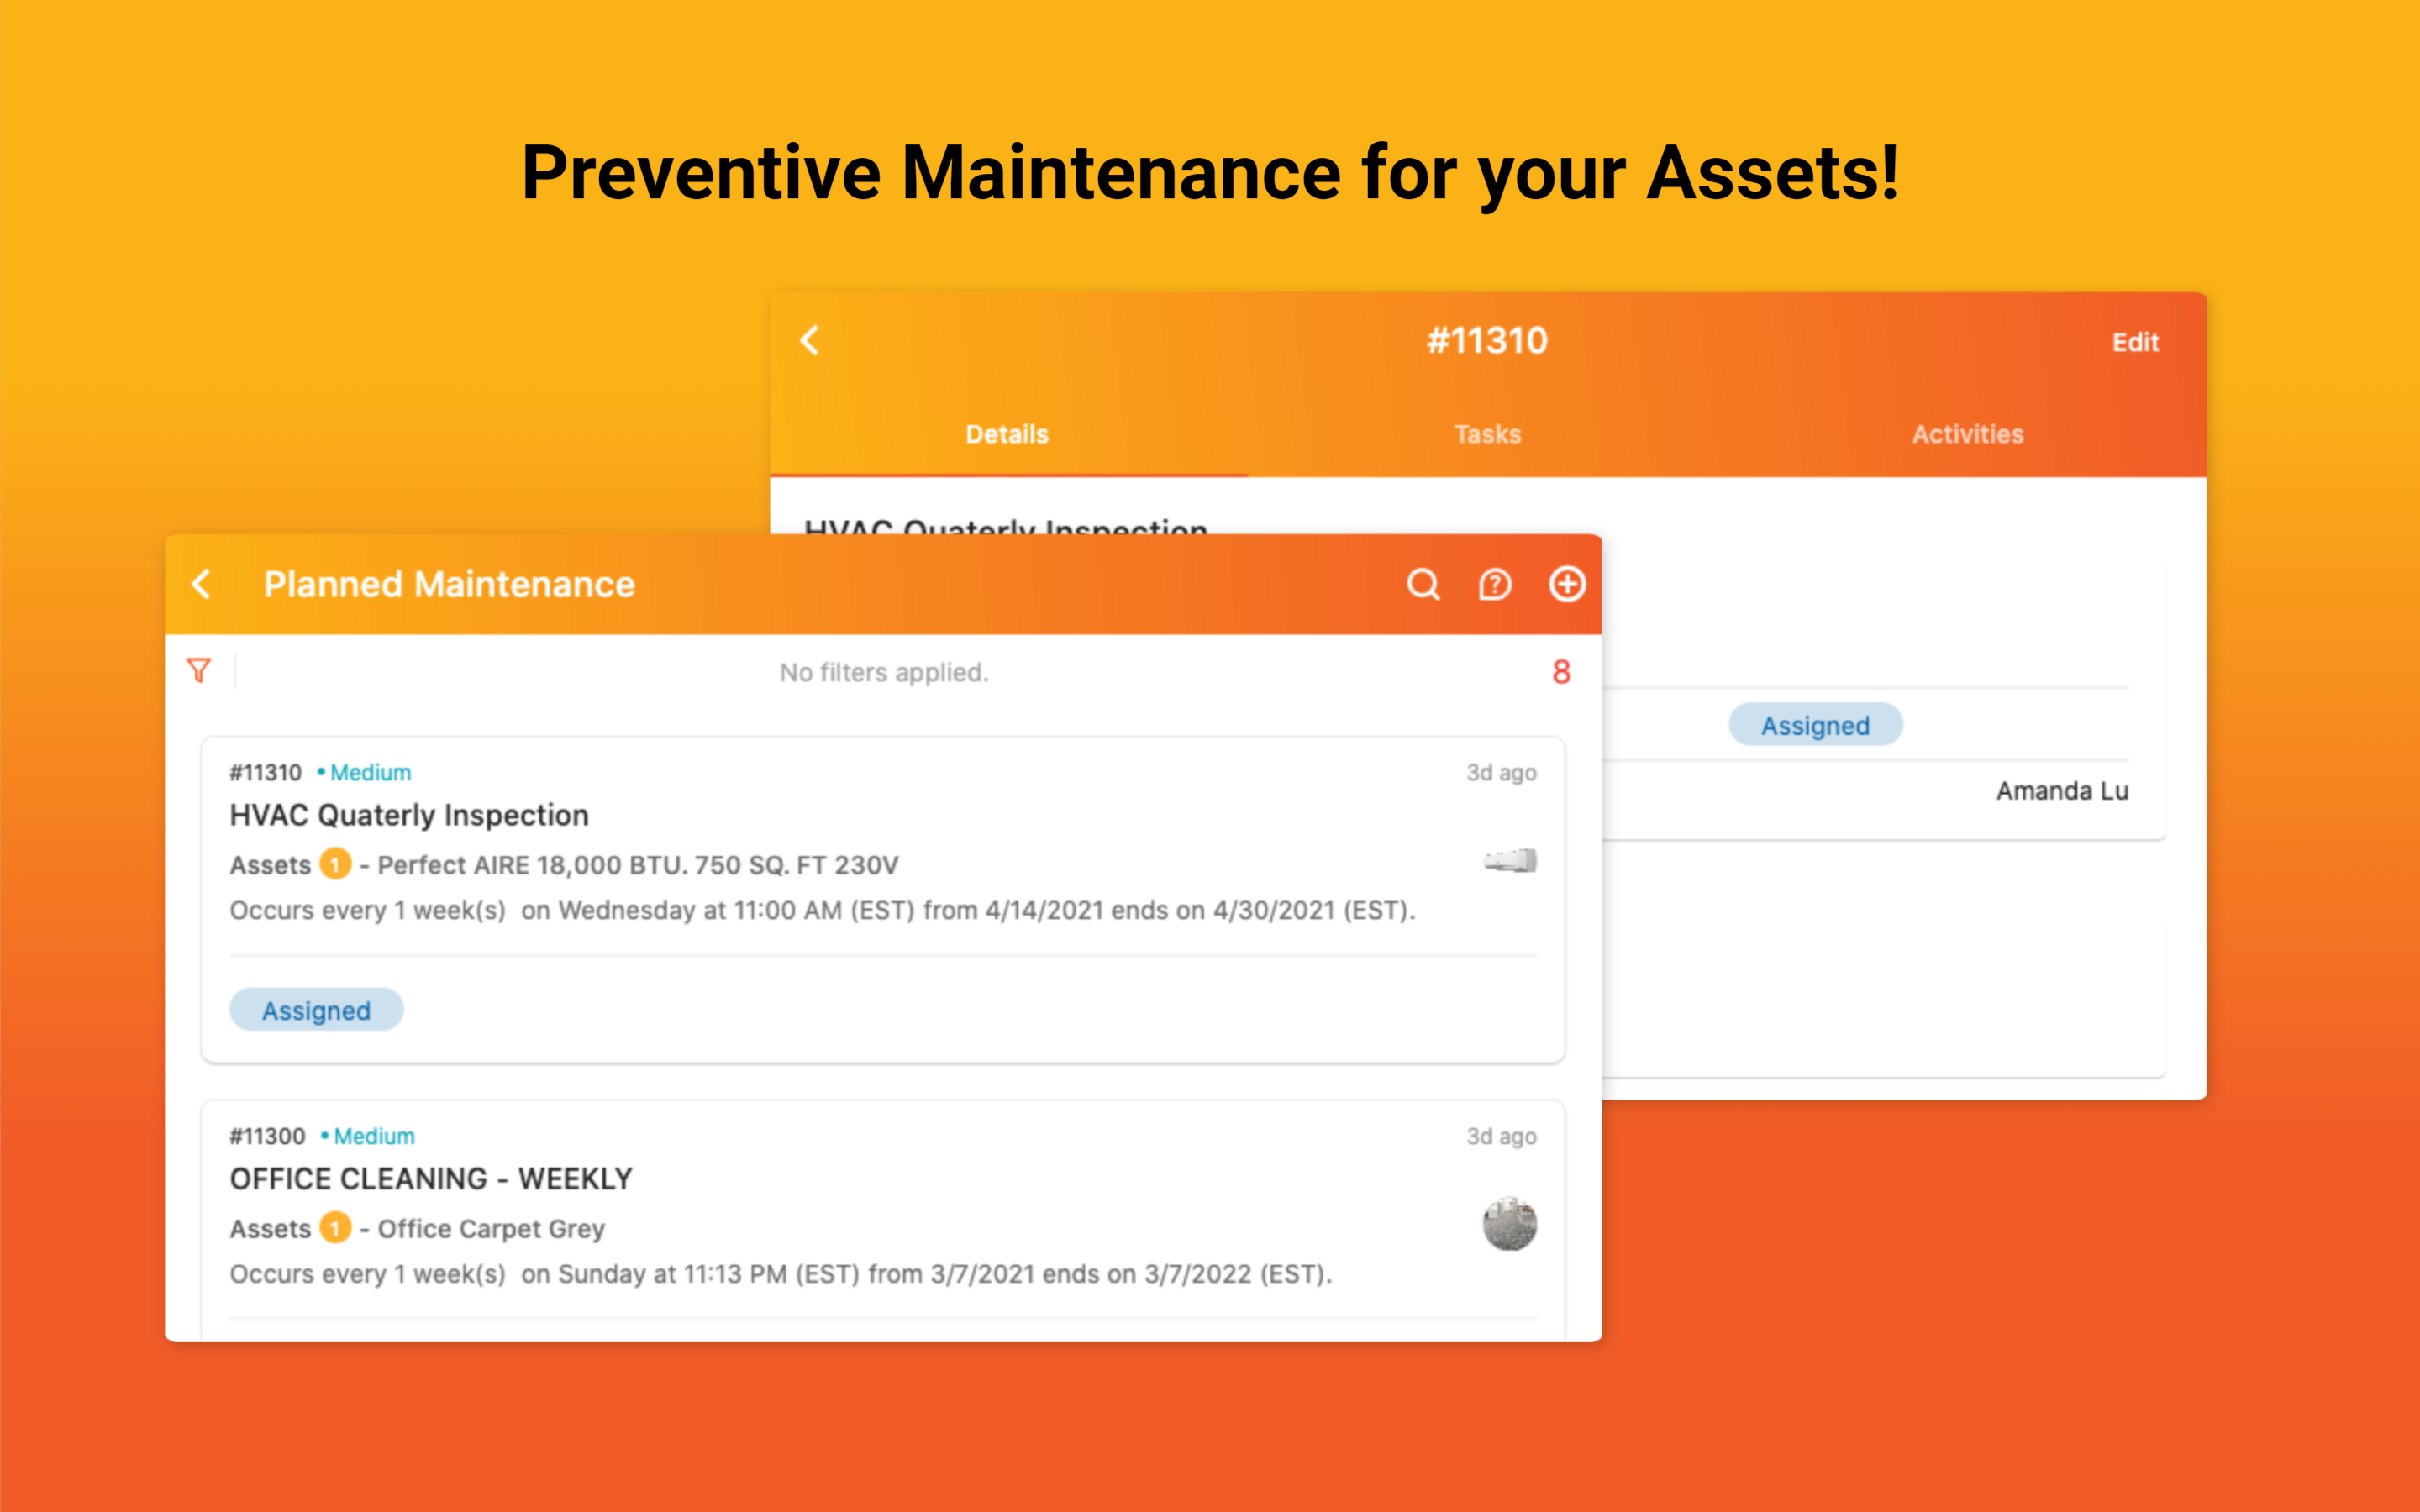 Schedule the Preventive Maintenance for your Assets!